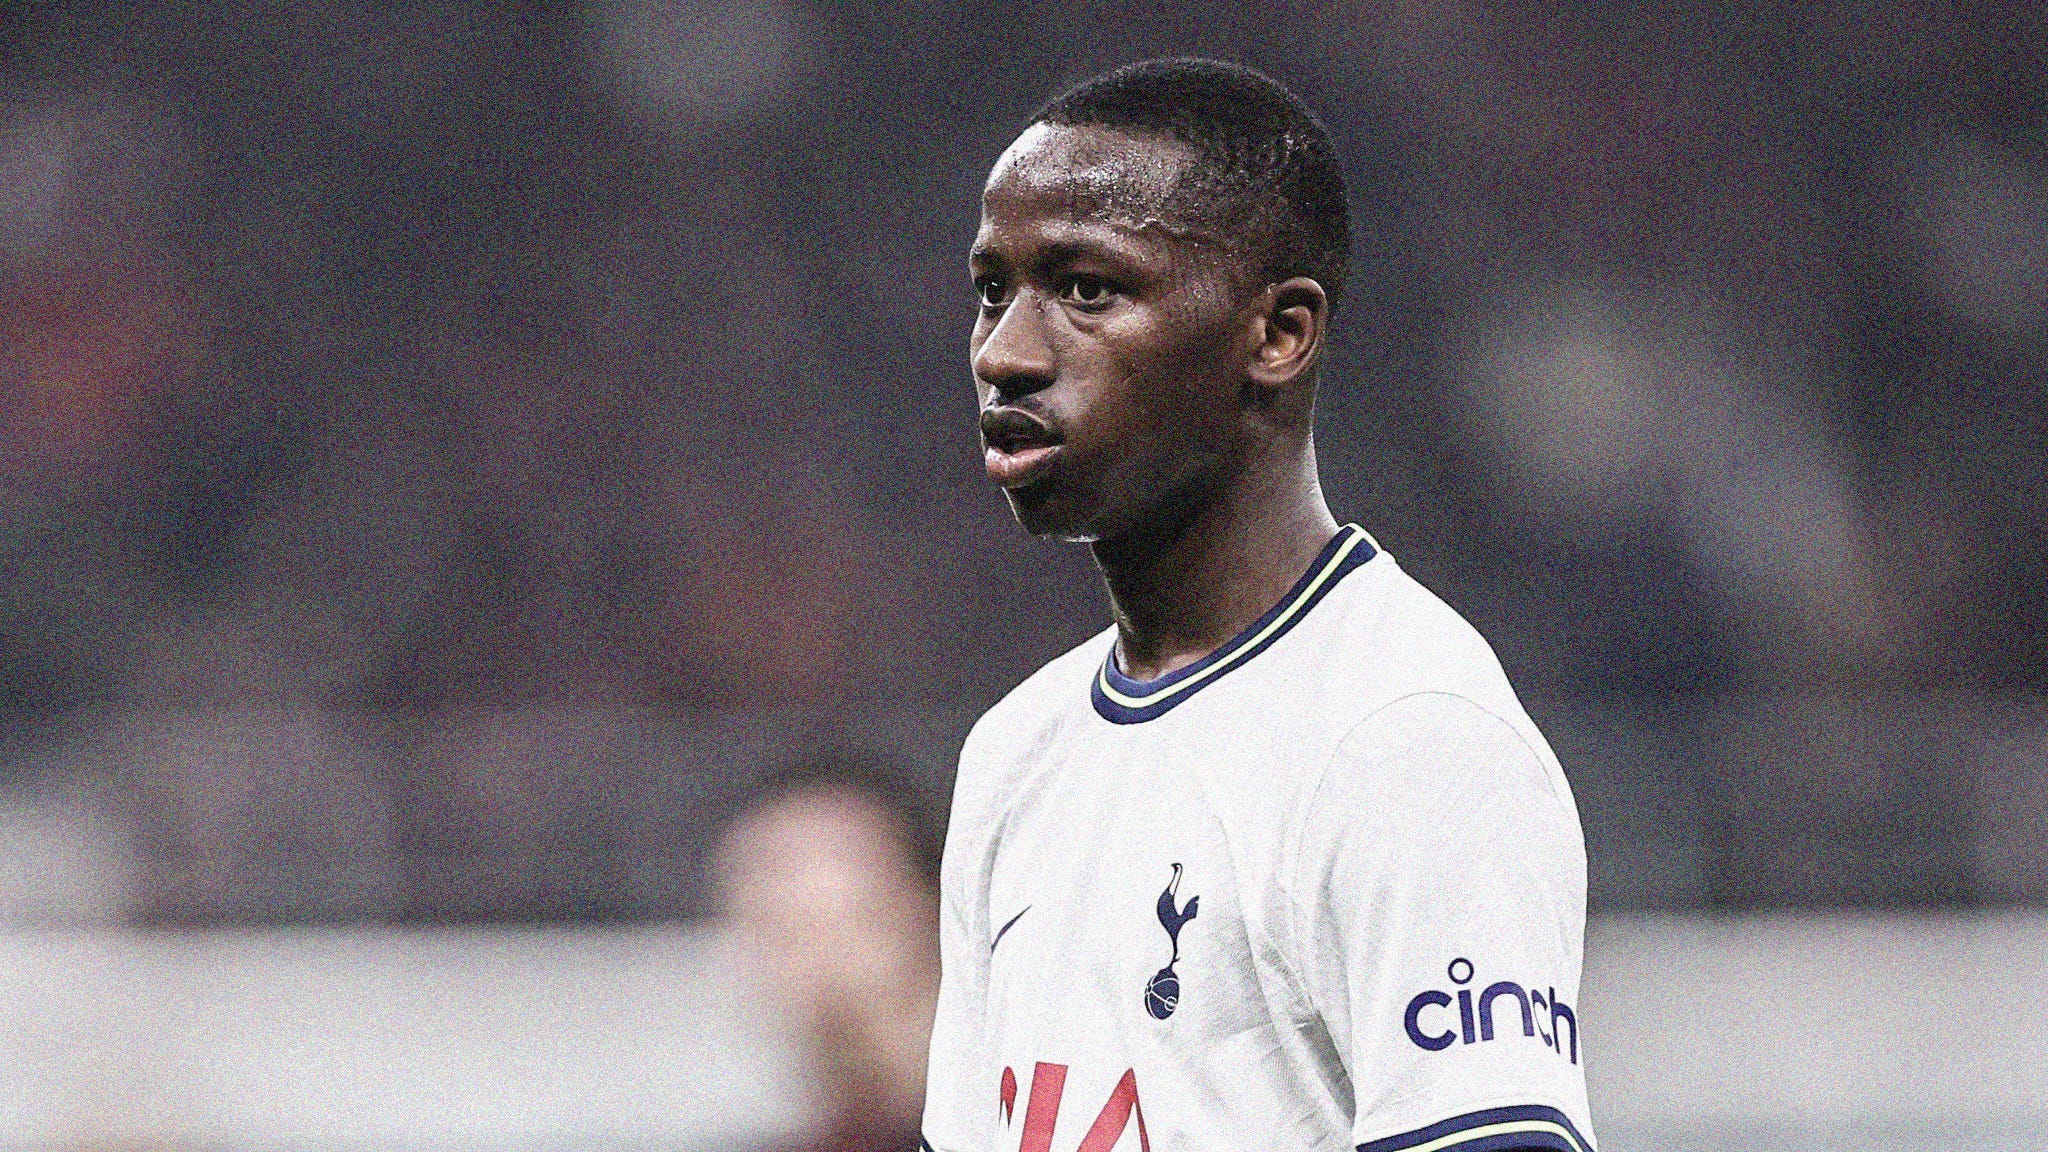 A close-up photo of Pape Matar Sarr playing for Spurs